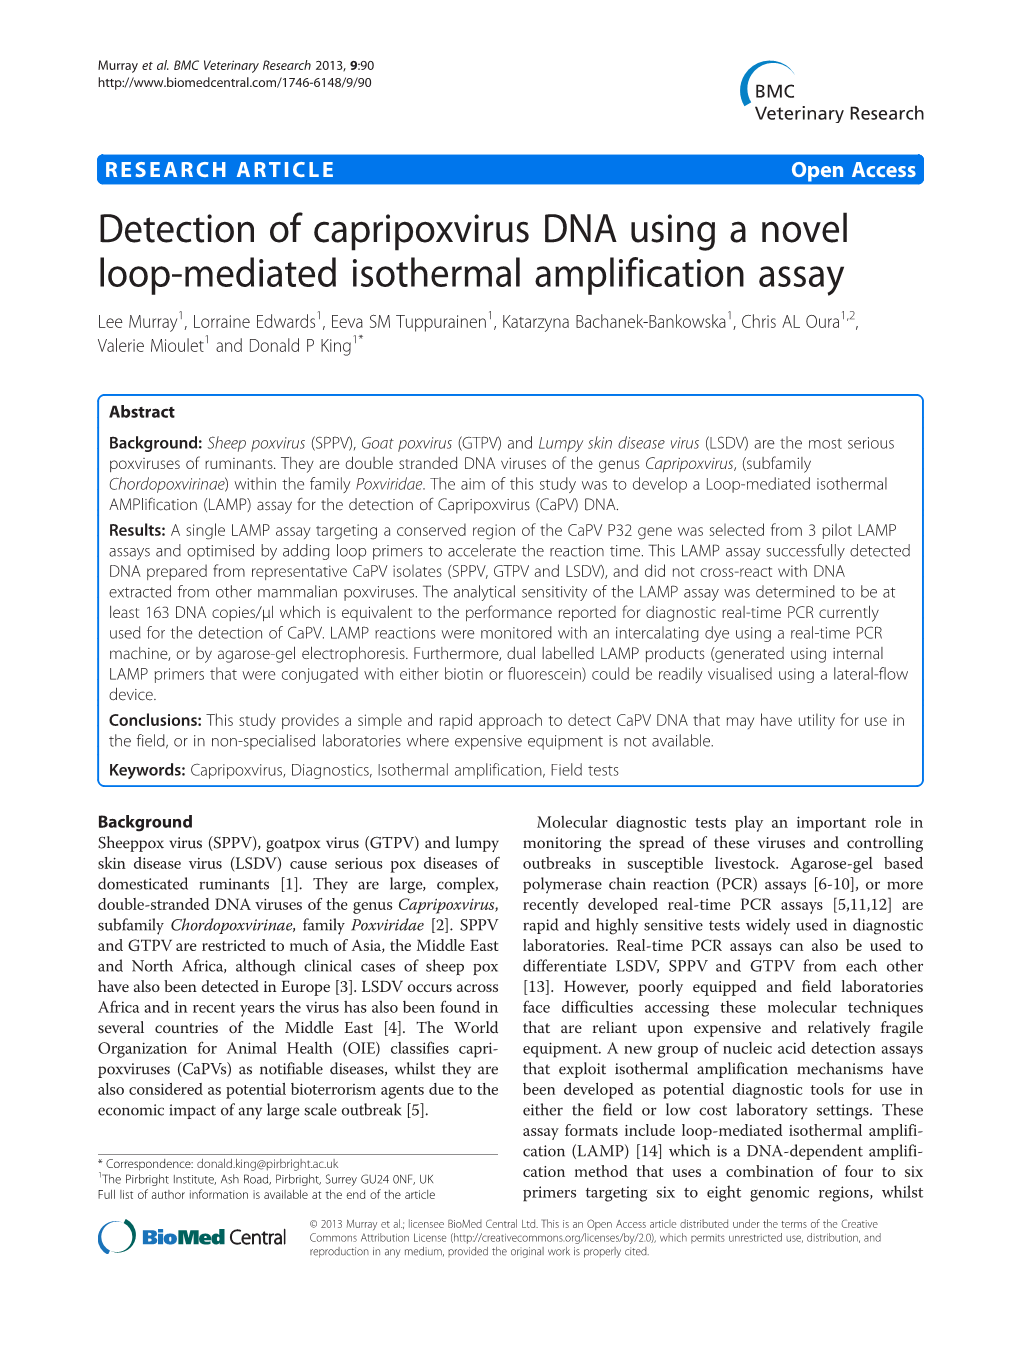 Detection of Capripoxvirus DNA Using a Novel Loop-Mediated Isothermal